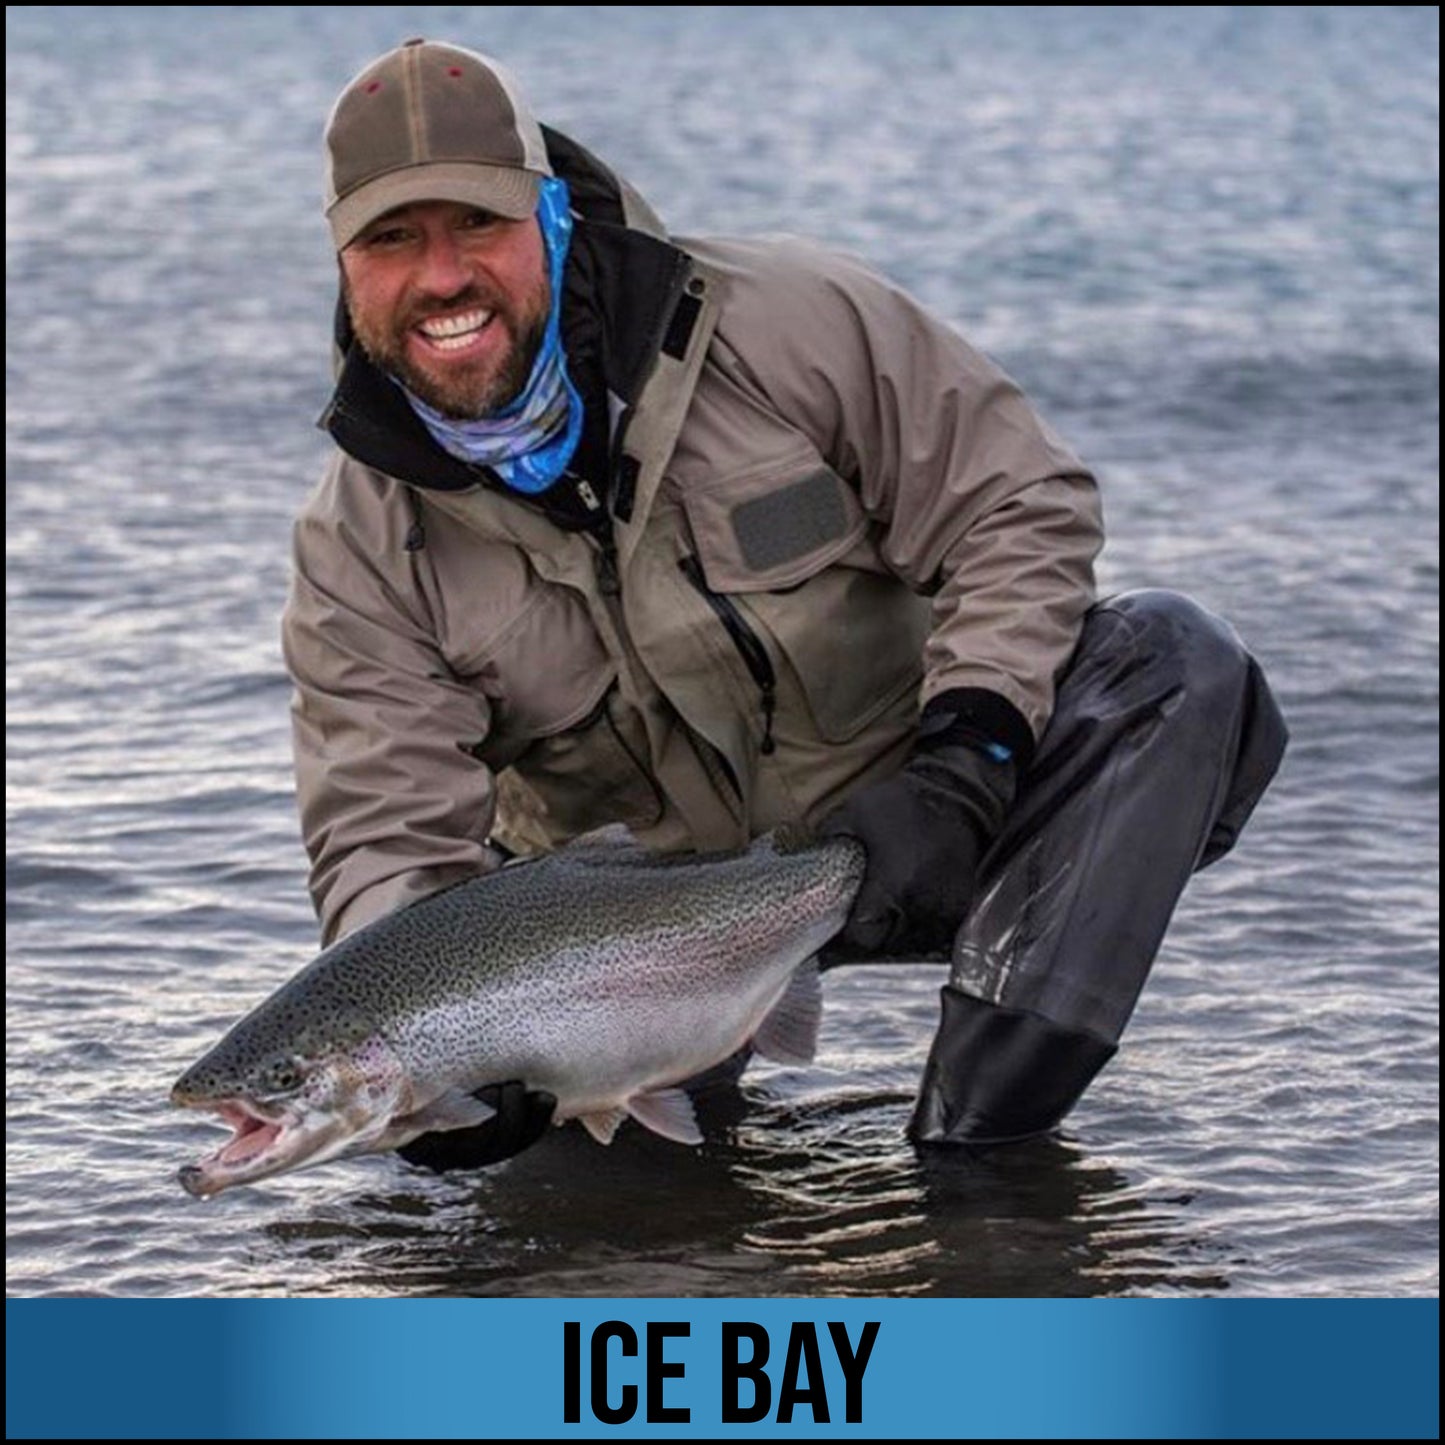 The Ice Bay is one of our original and best-selling designs. Its dexterity and functionality combined with warmth and comfort make this one of our most versatile gloves for cold, wet conditions.